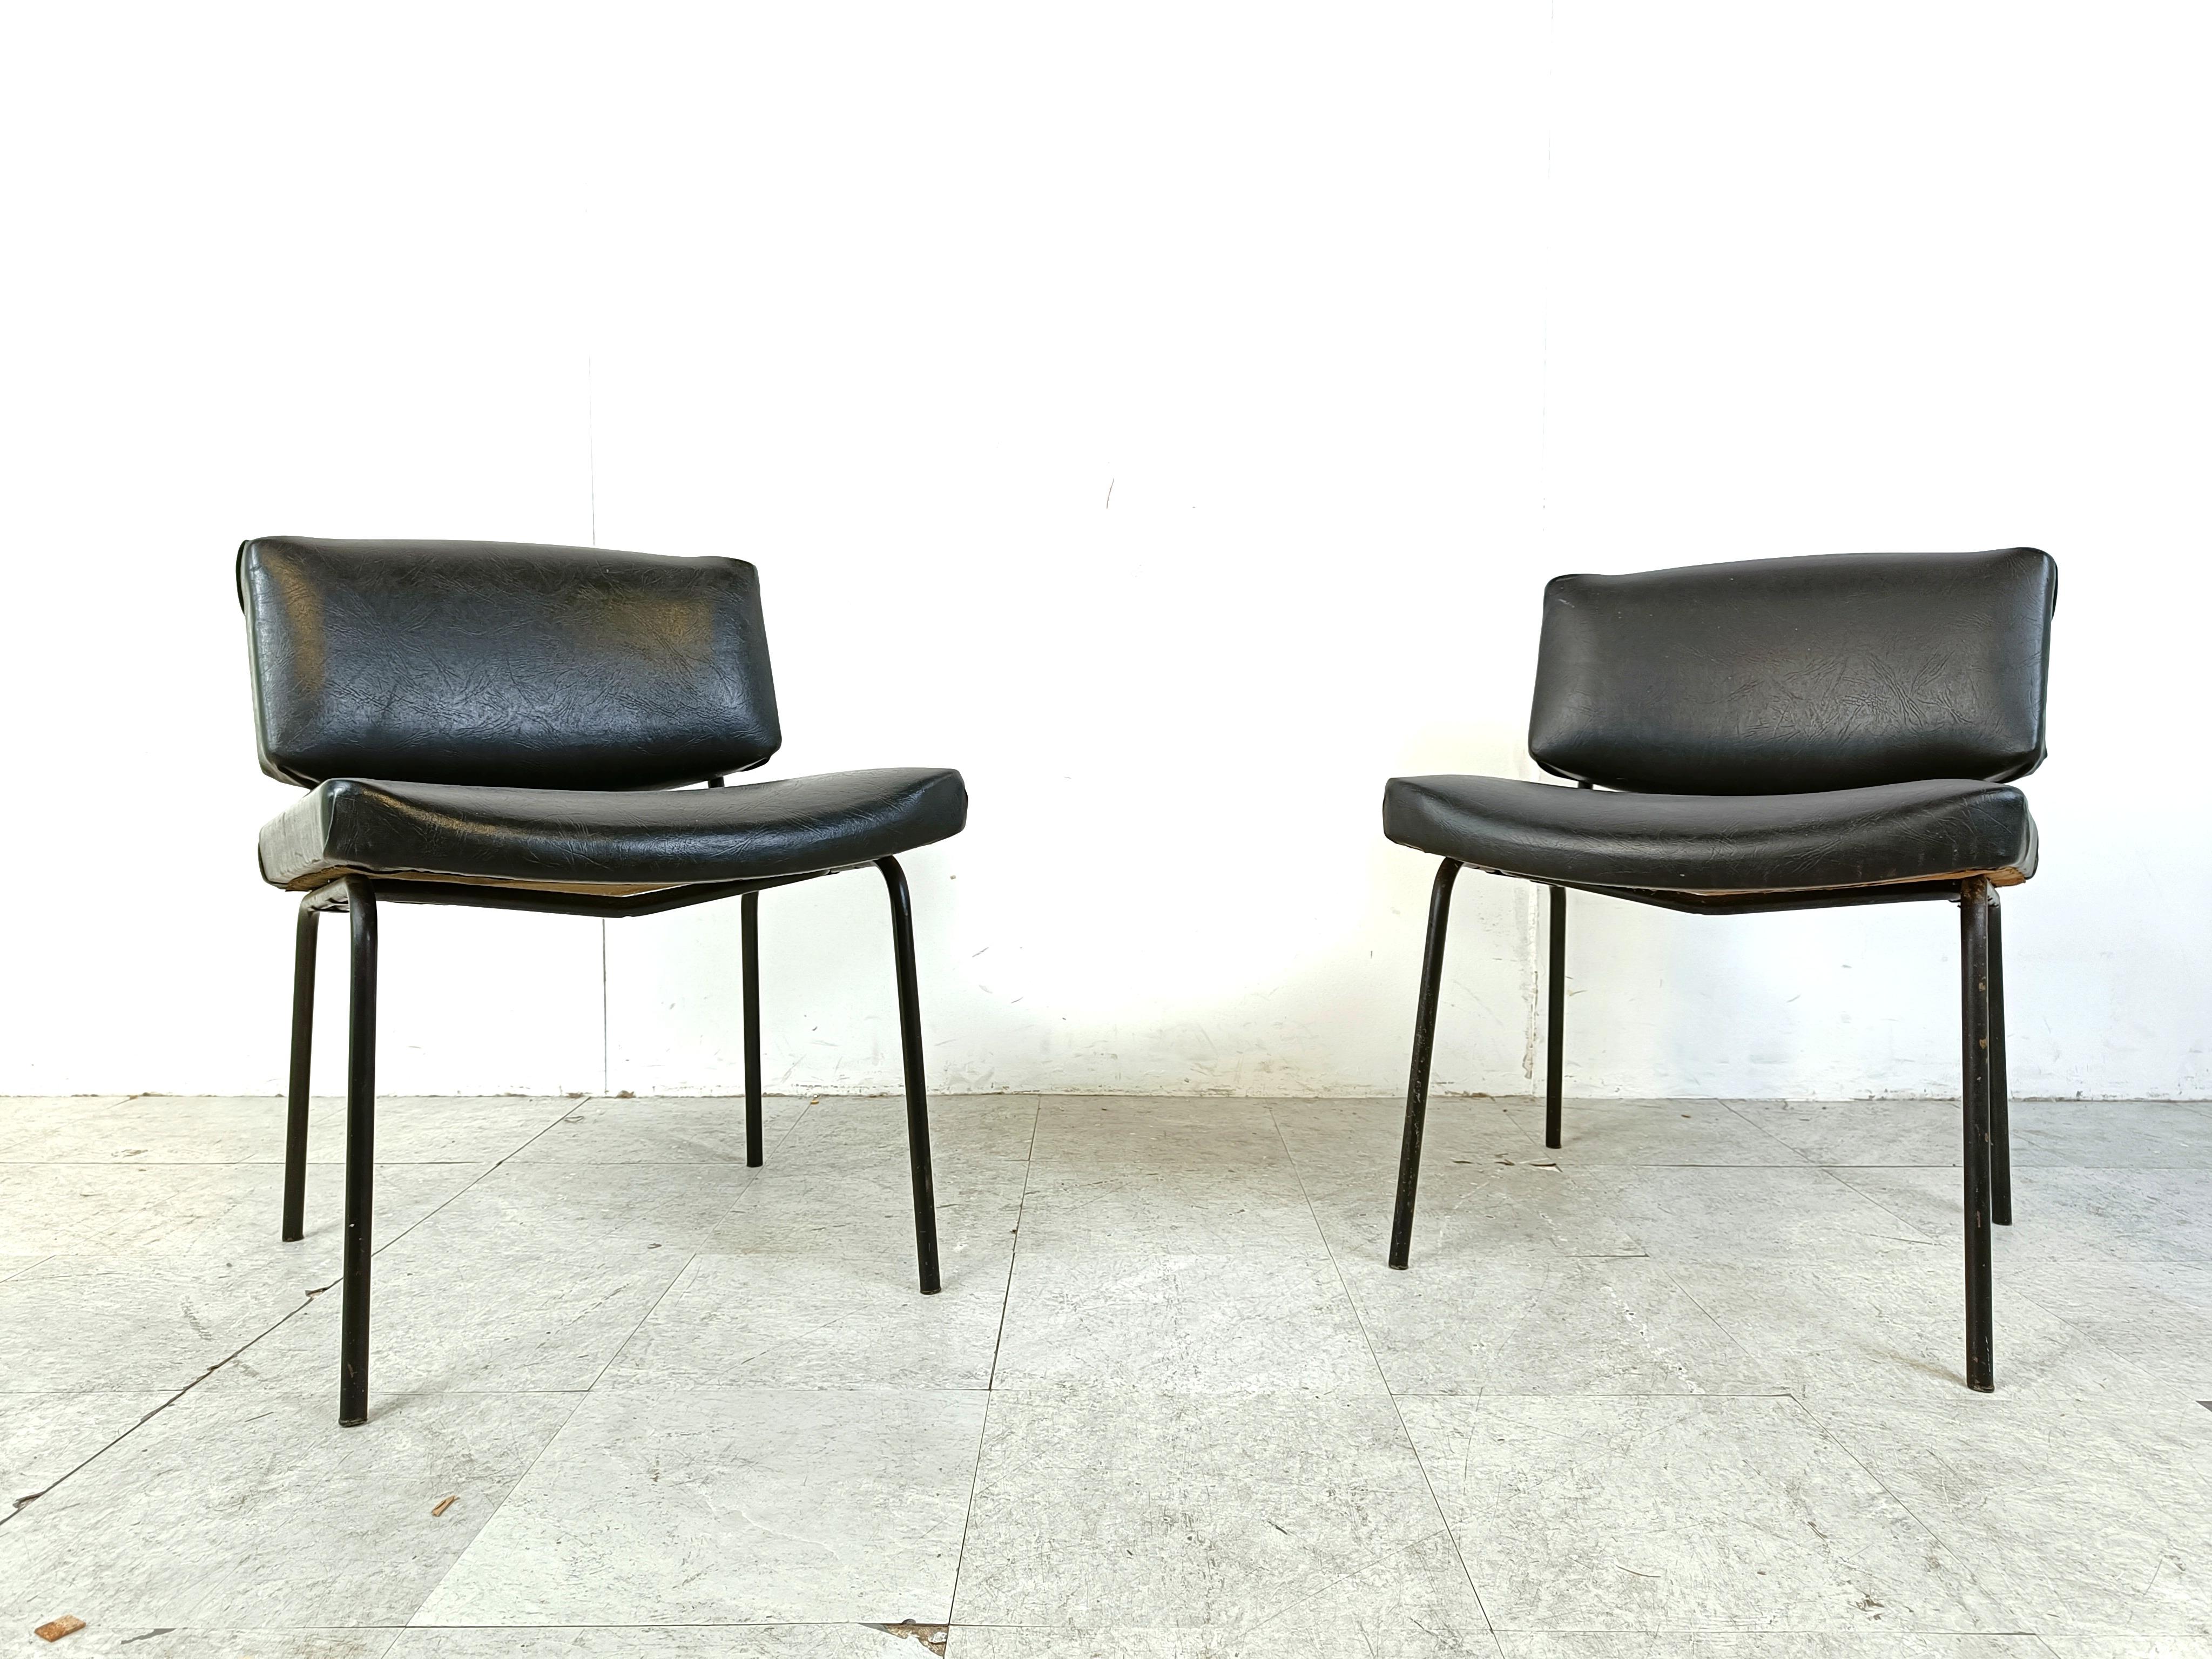 Belgian Vintage Conseil Chairs by Pierre Guariche 1950's, France For Sale